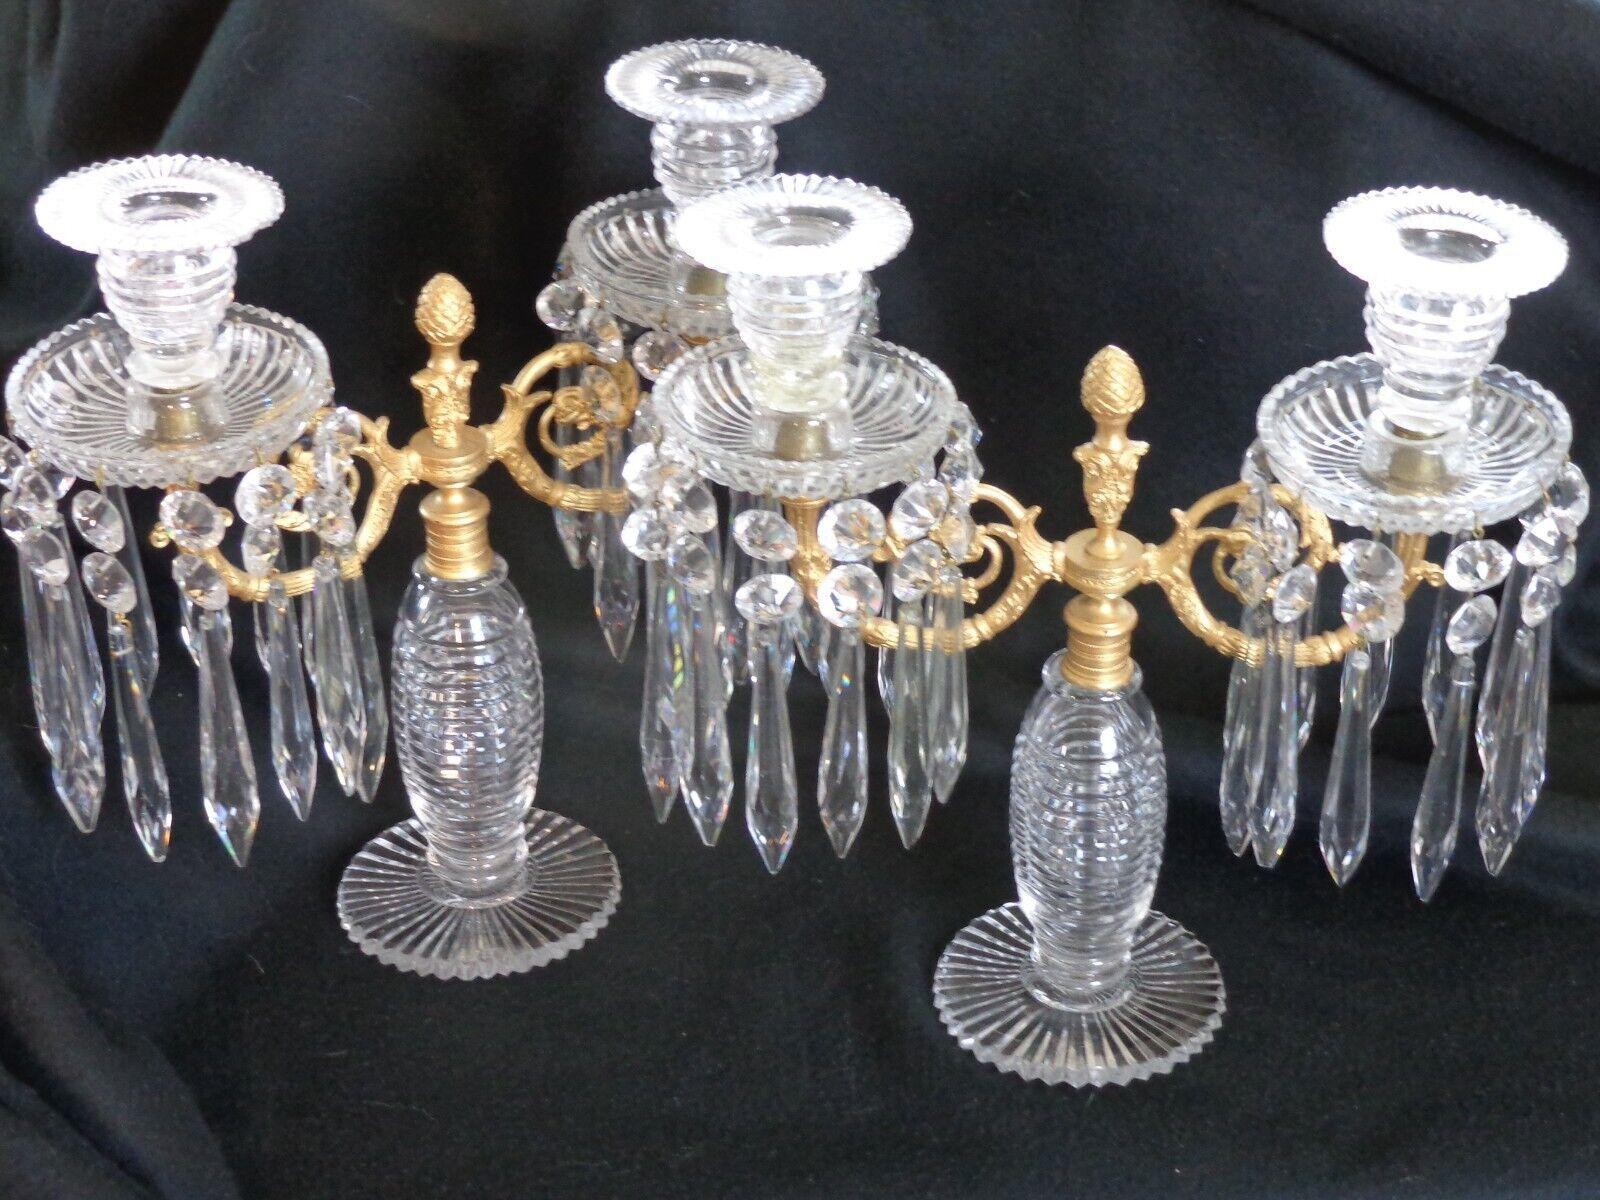 c1810 Pair Expertly Cut Glass w/ Ormolu Candelabra/ Candle Holders. The cut glass is extraordinary, the Ormolu shines. This is a high quality piece of Gorgian history.